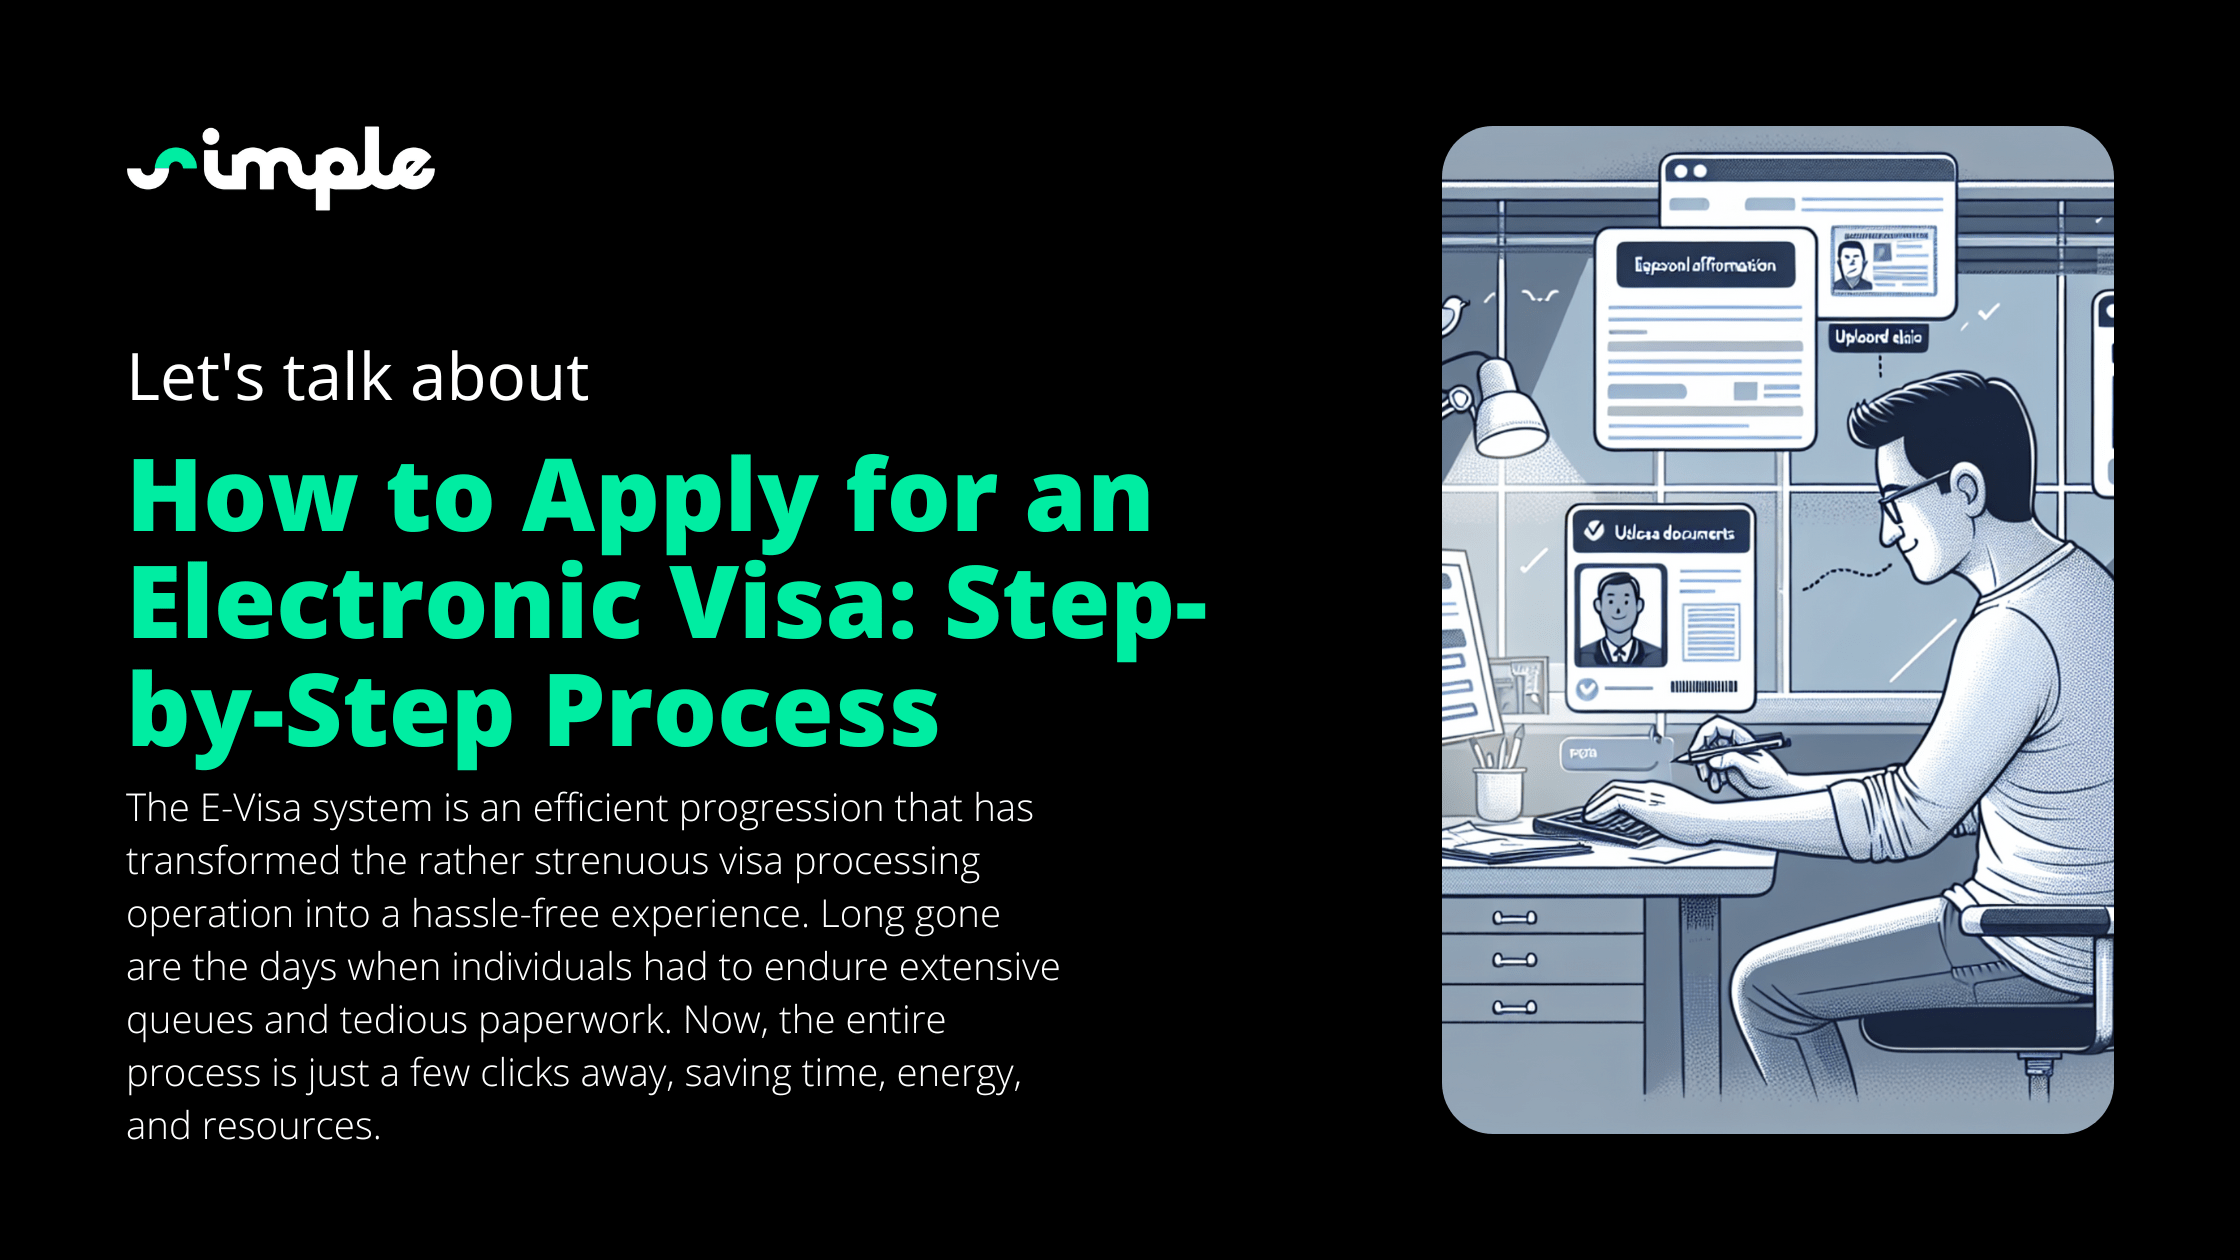 How to Apply for an Electronic Visa: 3 Easy Steps